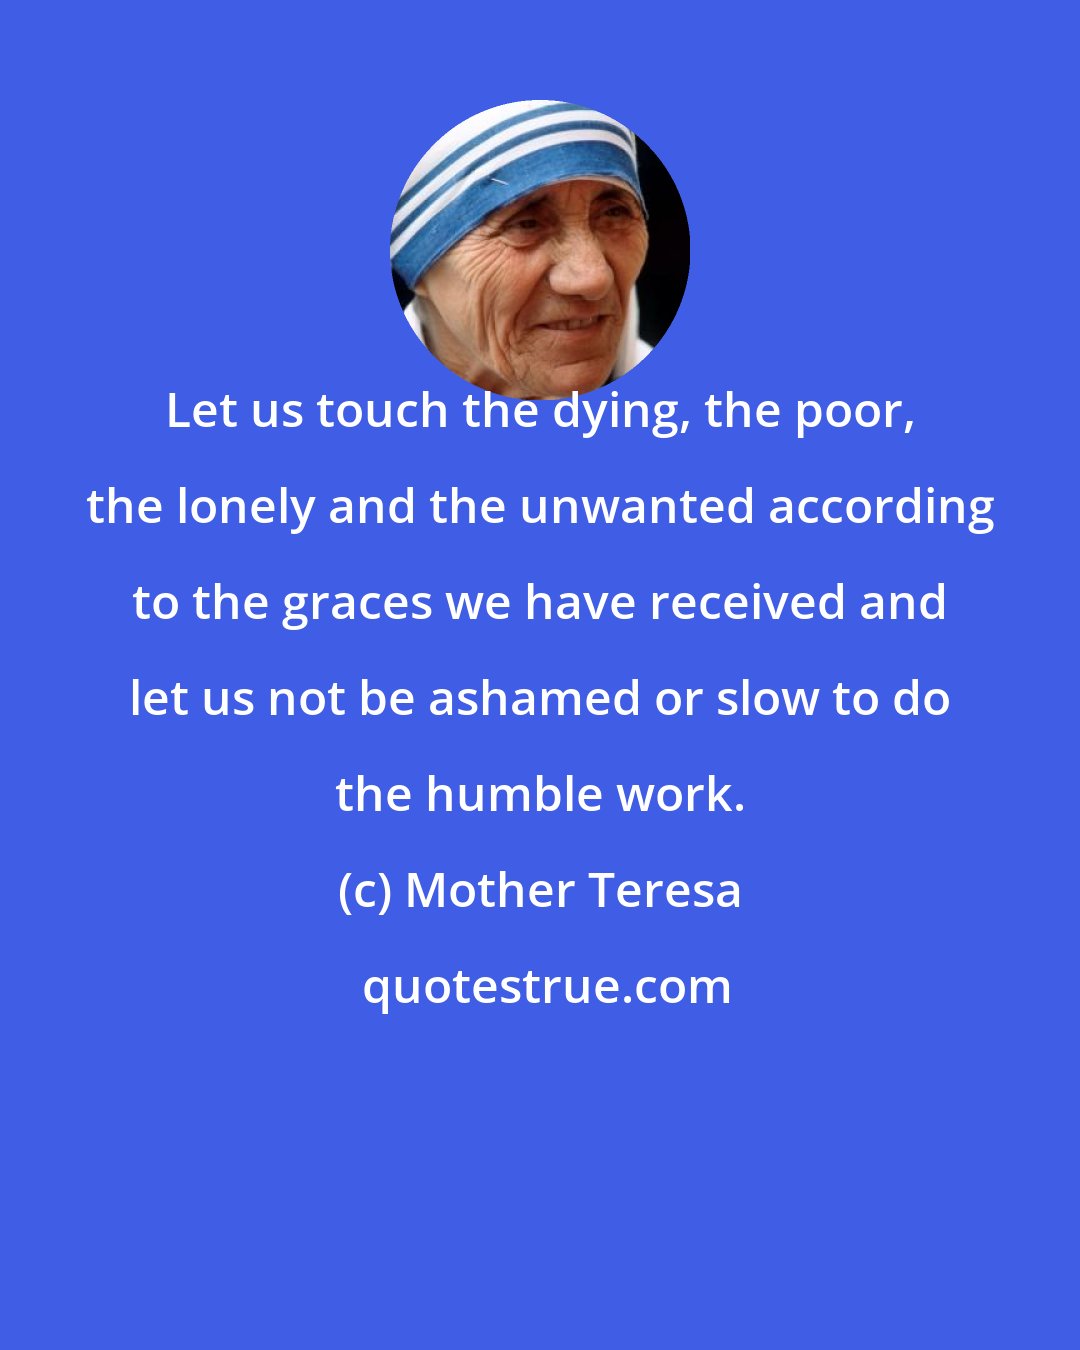 Mother Teresa: Let us touch the dying, the poor, the lonely and the unwanted according to the graces we have received and let us not be ashamed or slow to do the humble work.